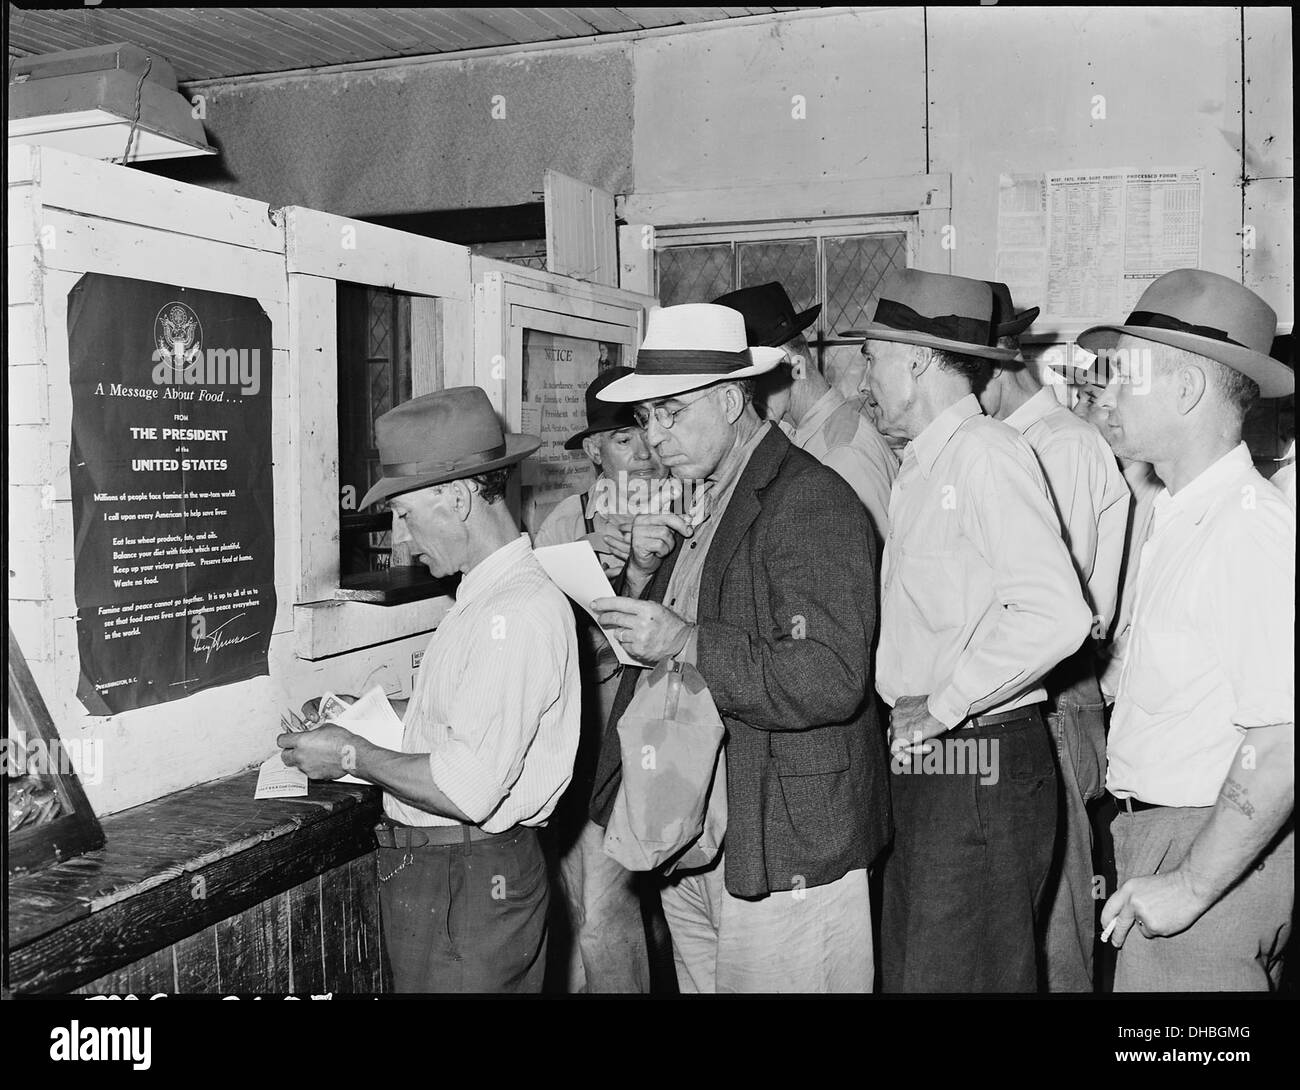 Blaine Sergent, third in line, at the pay window. P V & K Coal Company, Clover Gap Mine, Lejunior, Harlan County... 541332 Stock Photo